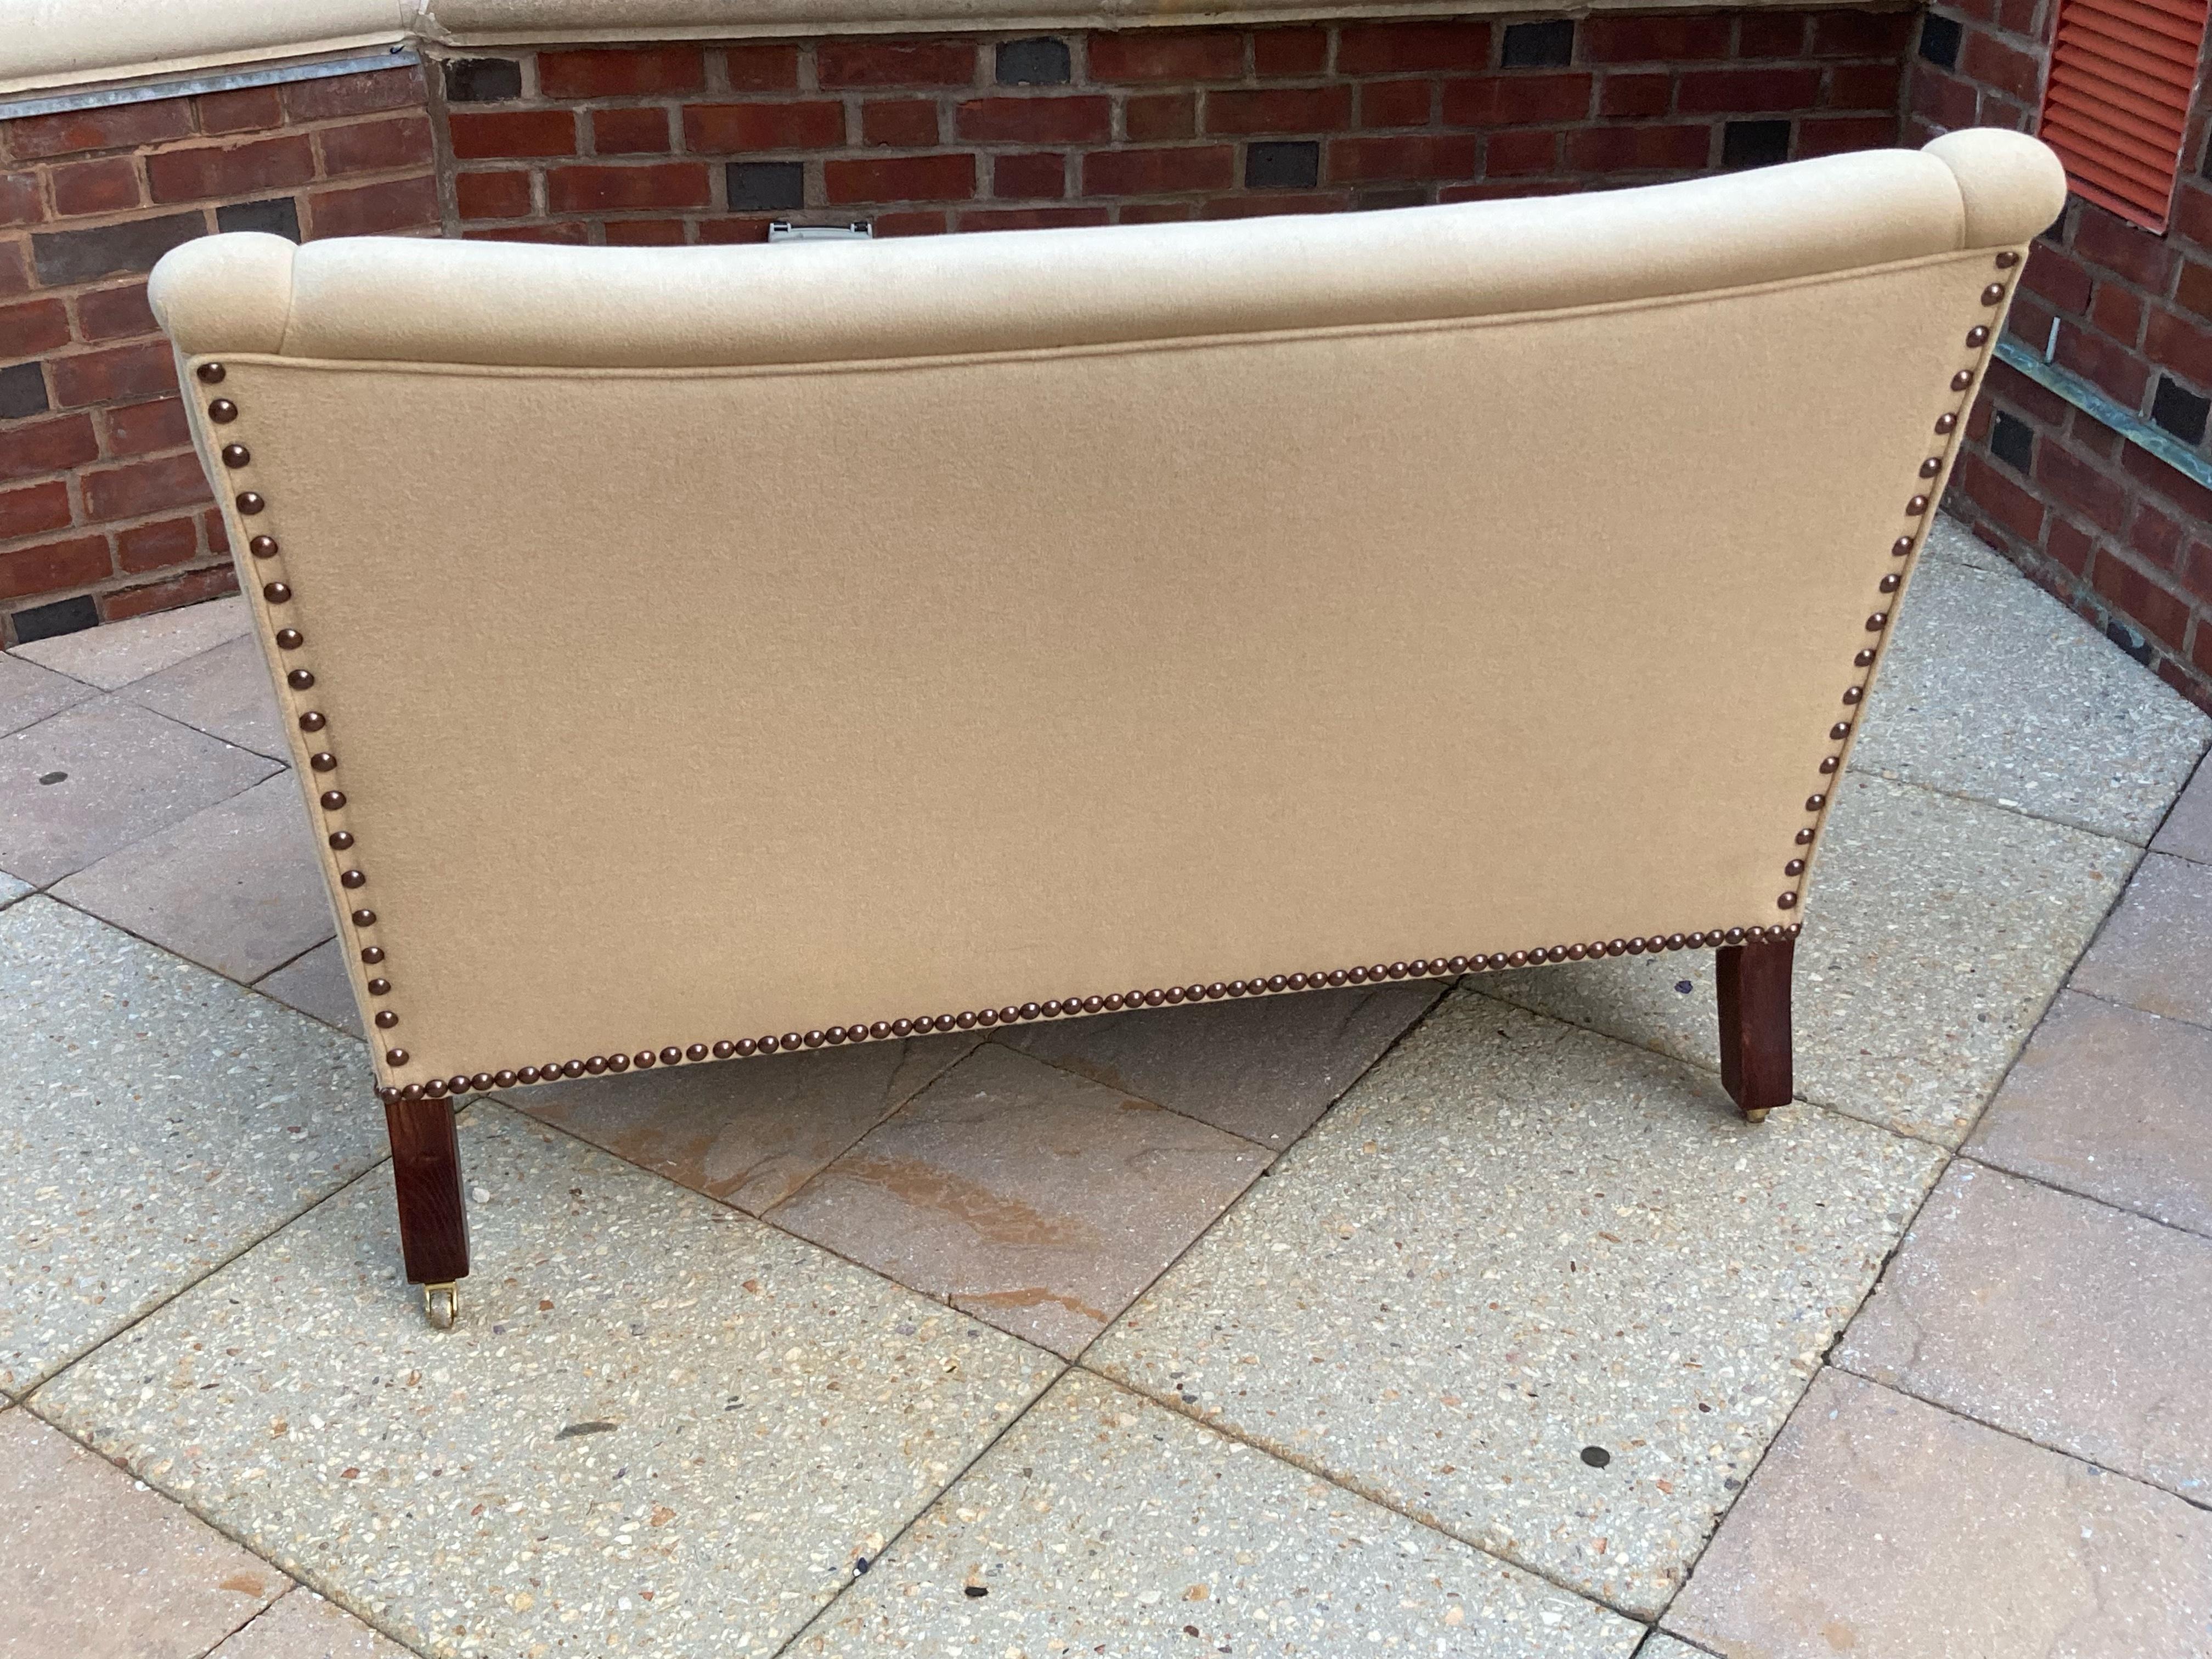 Classic petite Fairhill settee by George Smith having fixed back and fixed seat and upholstered in dark cream wool flannel with handsome nailhead trim and mahogany legs with brass casters. 
There are some spots on upholstery as shown in photos and